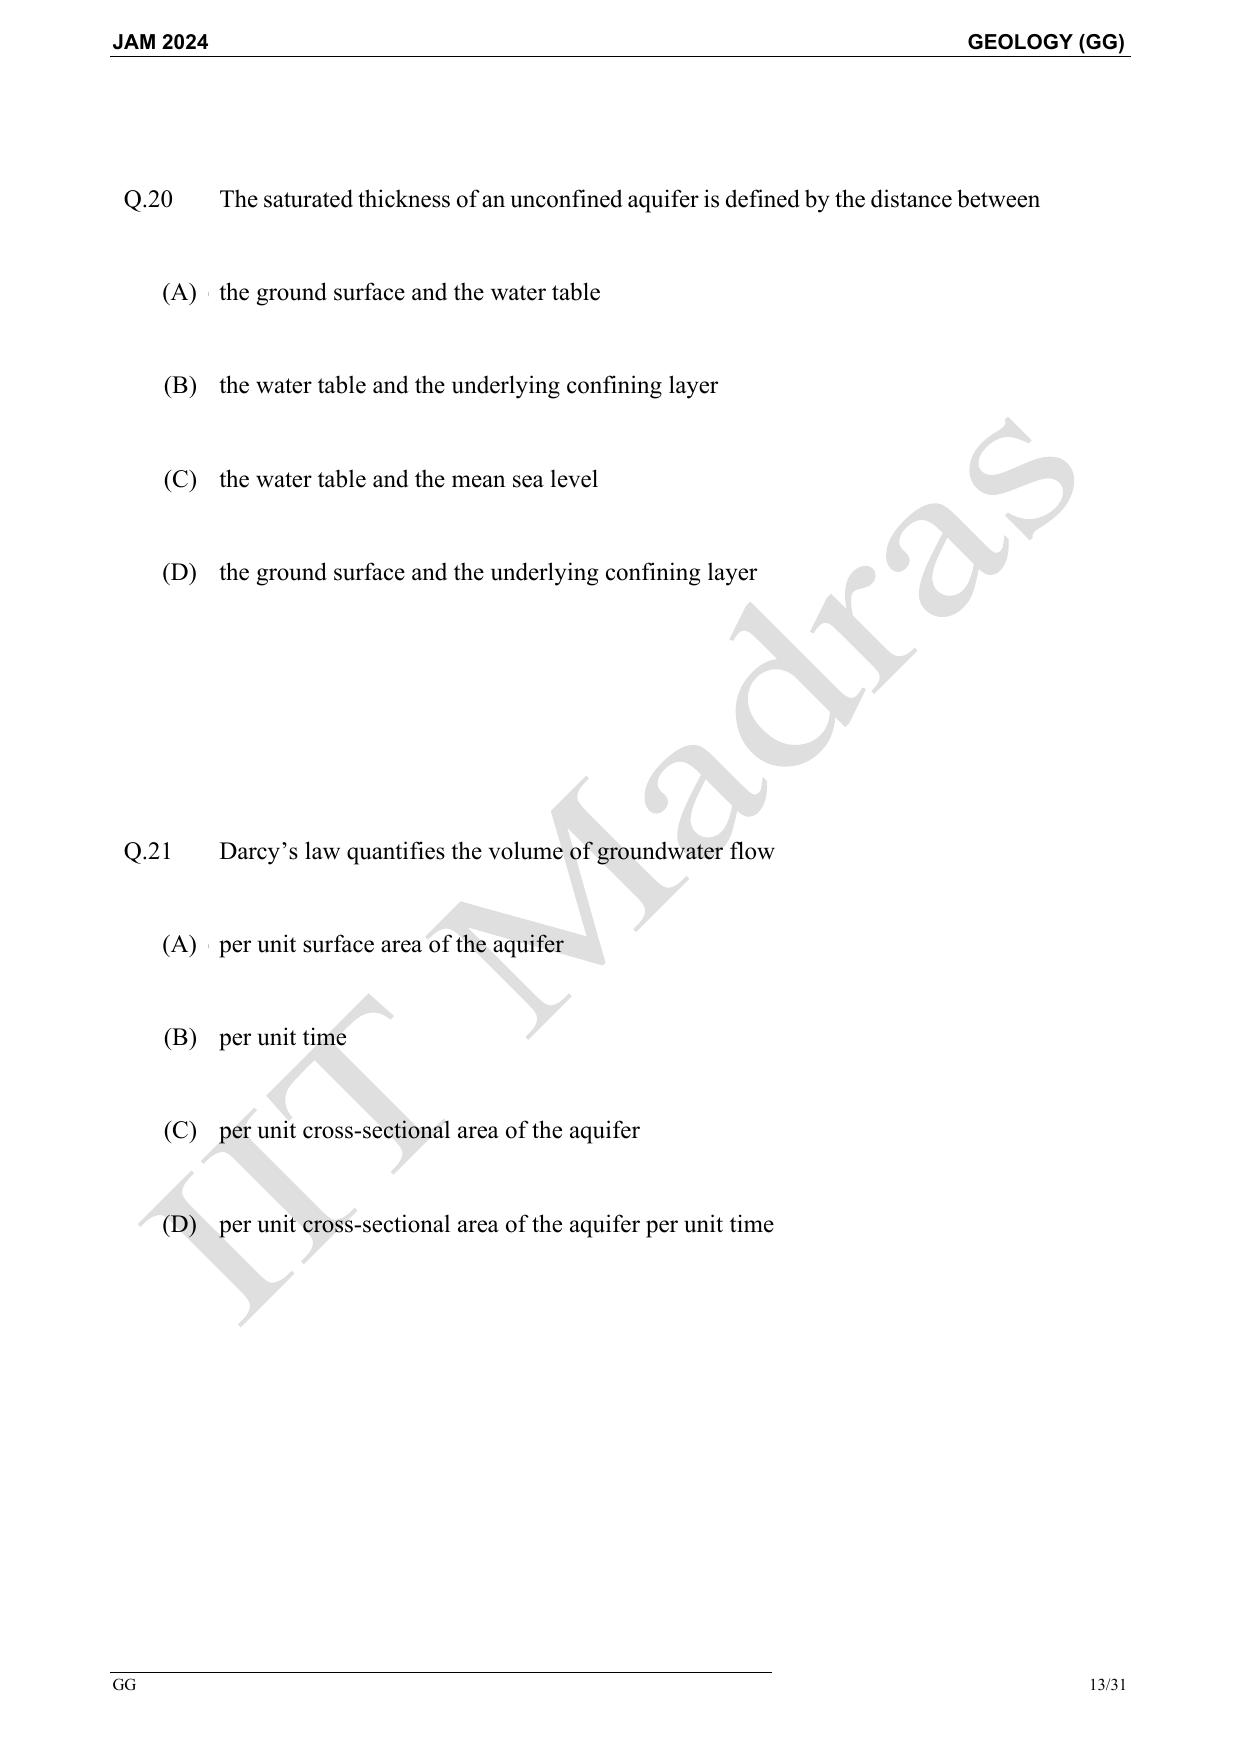 IIT JAM 2024 Geology (GG) Master Question Paper - Page 13